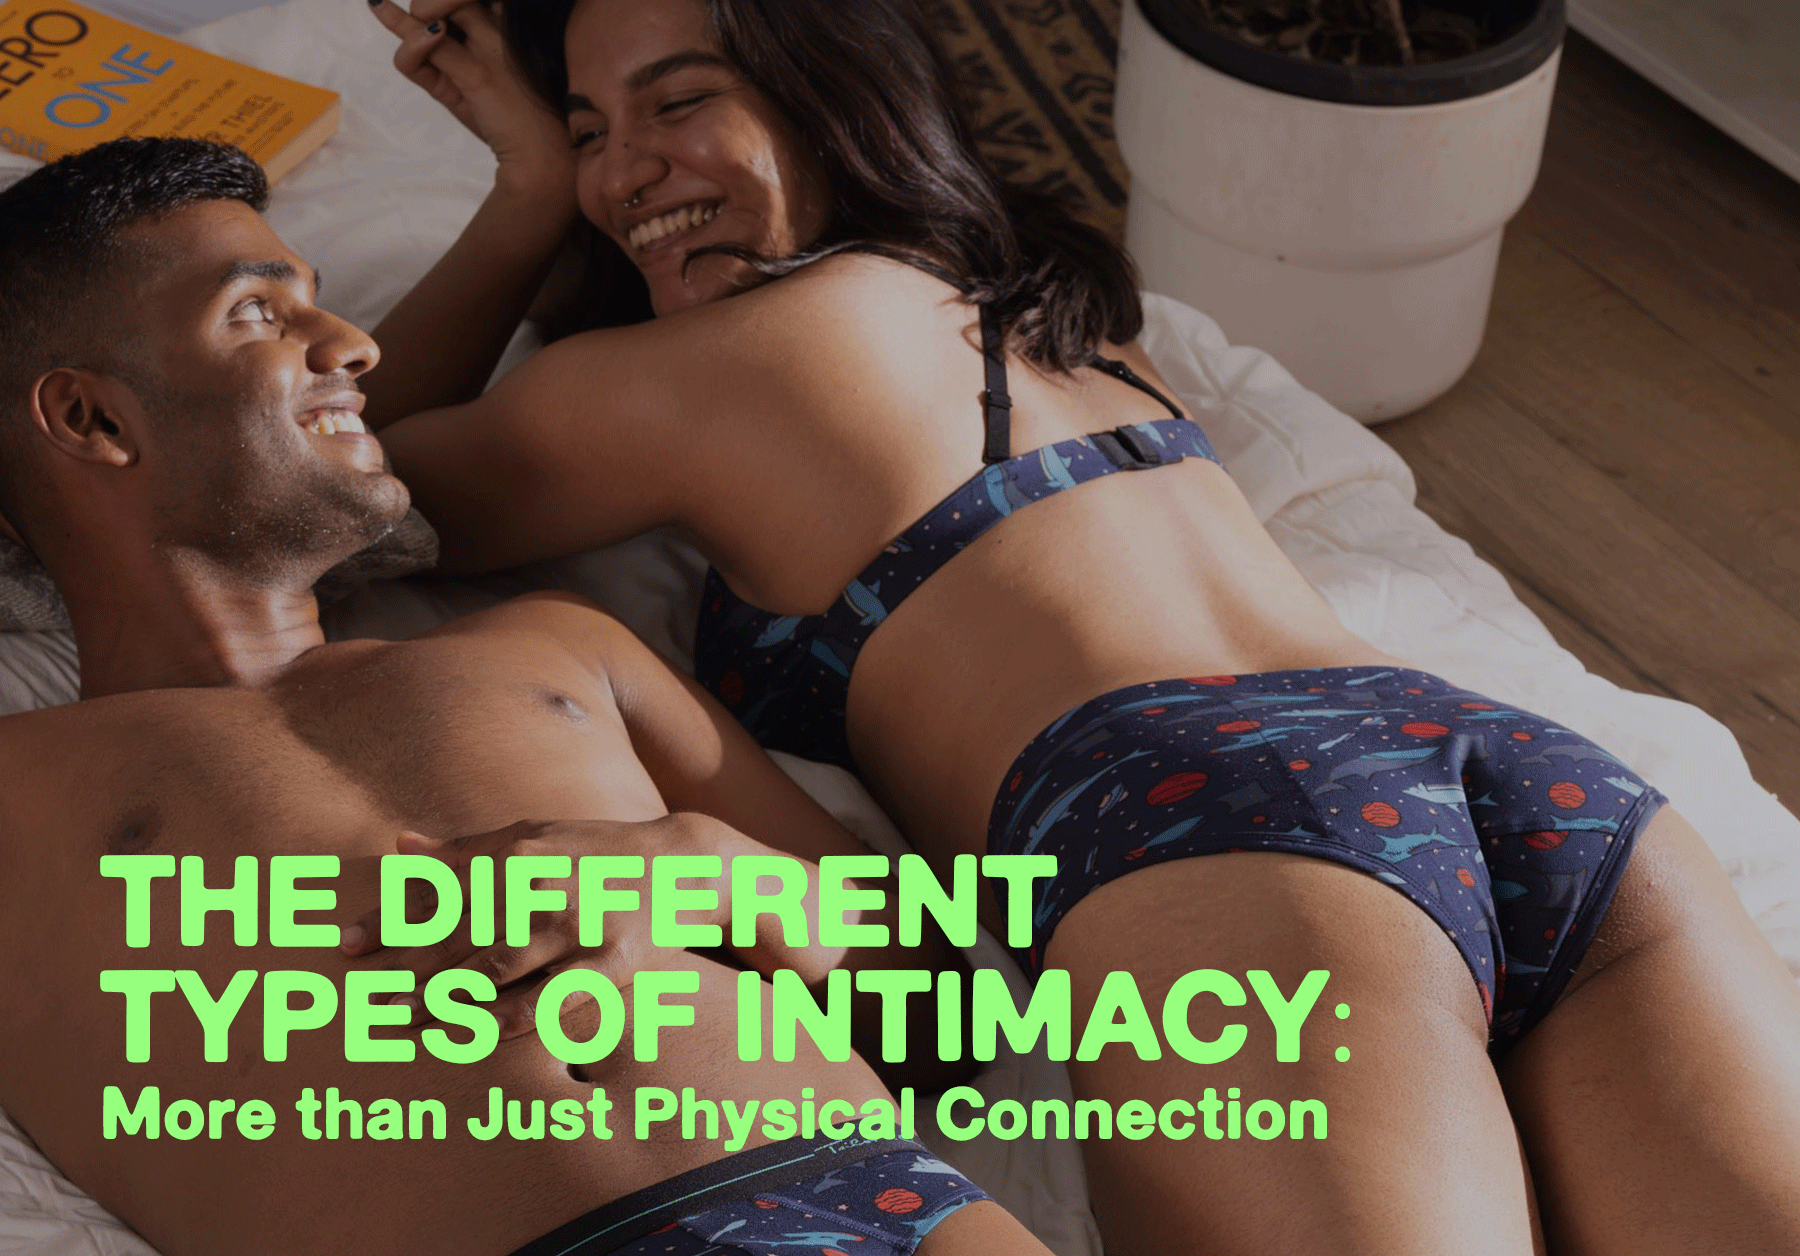 The Different Types of Intimacy: More than Just Physical Connection